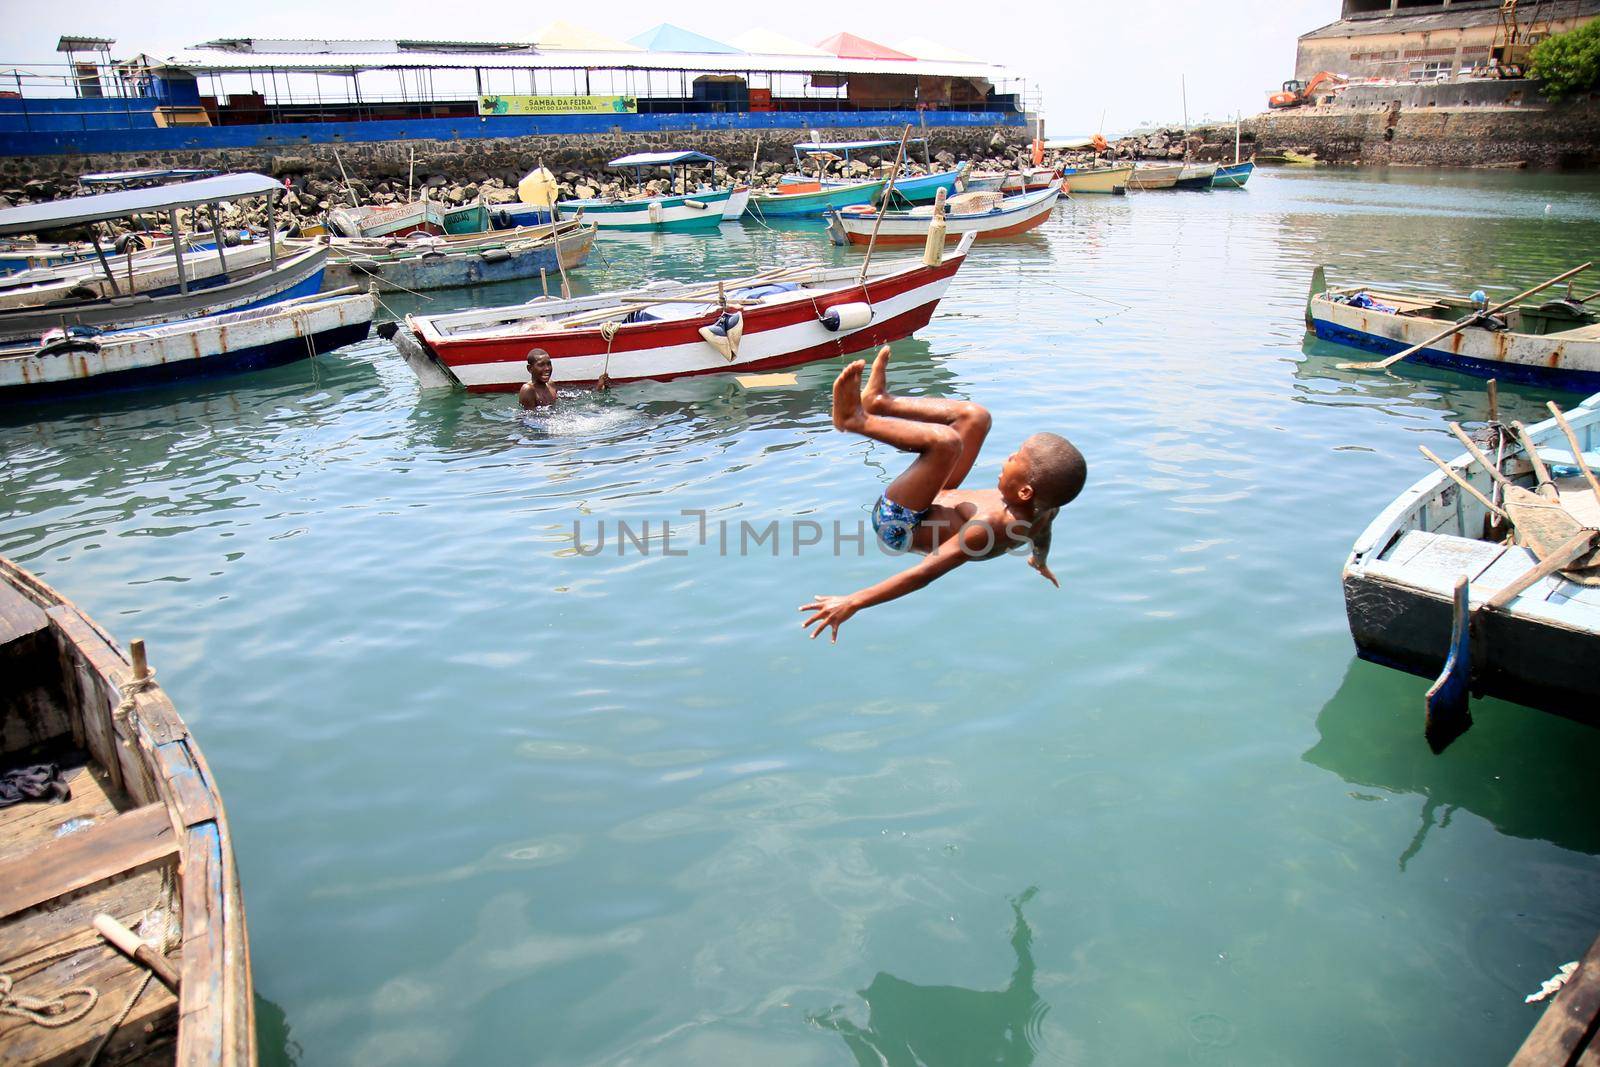 salvador, bahia, brazil - february 17, 2021: children playing next to boats in the port of Sao Joaquim fair in the city of Salvador.